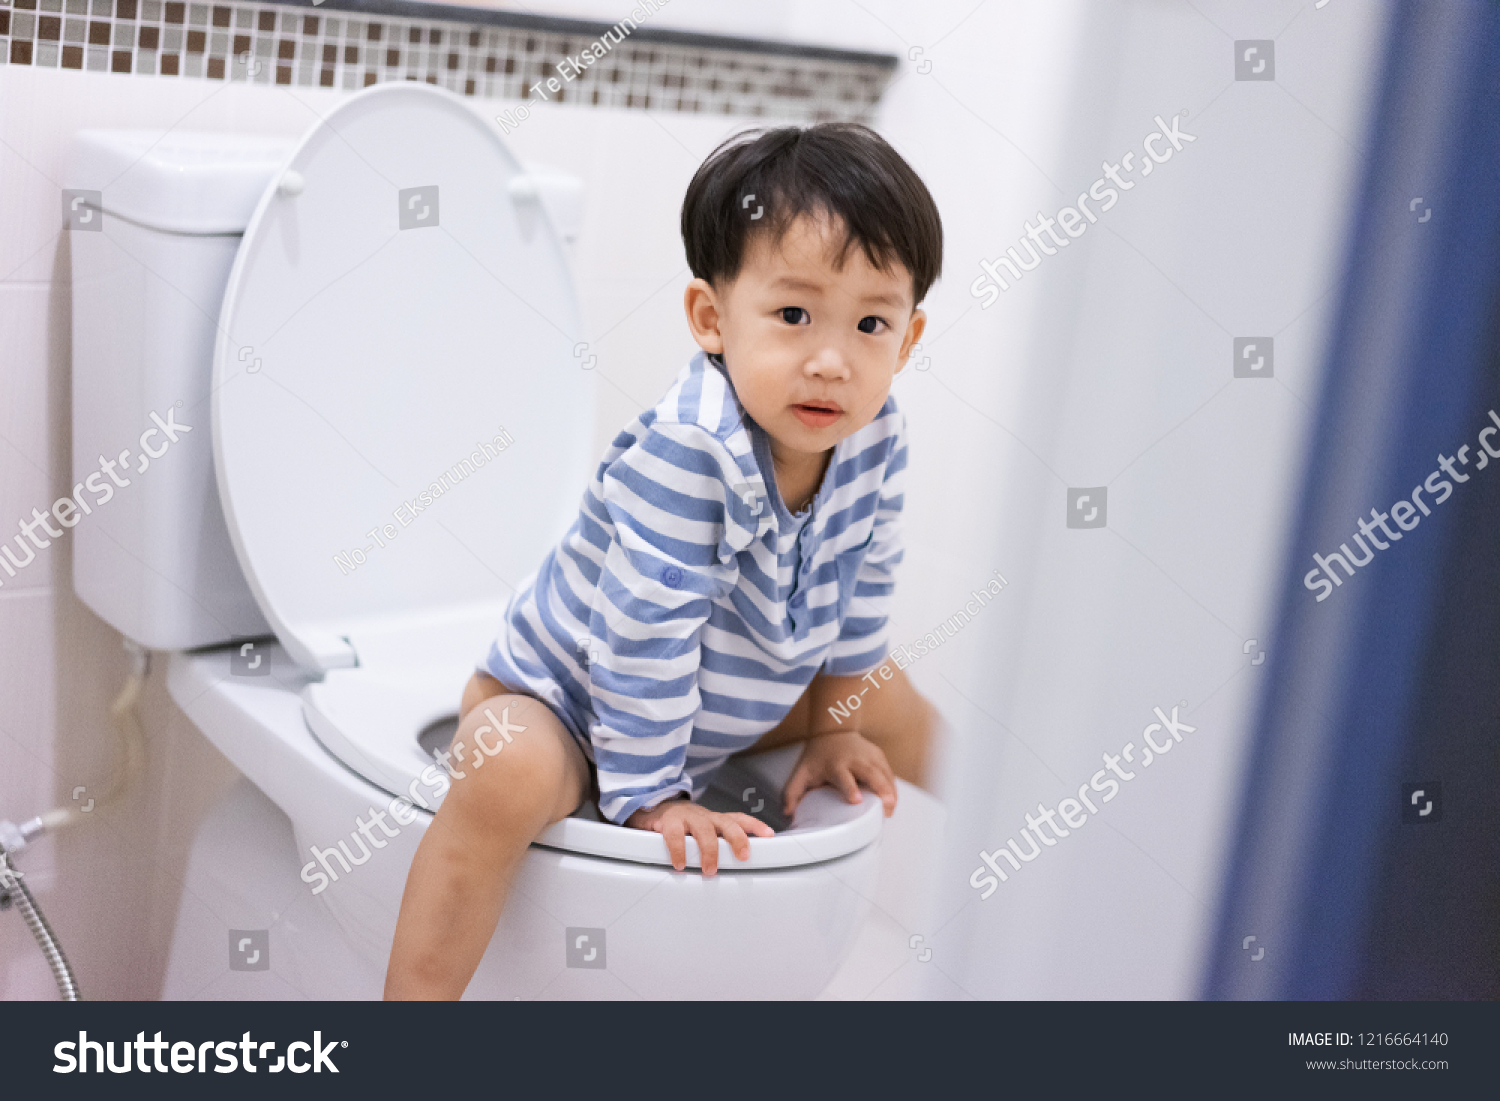 Boy Sitting On Toilet Suffering Constipation Stock Photo 1216664140 ...